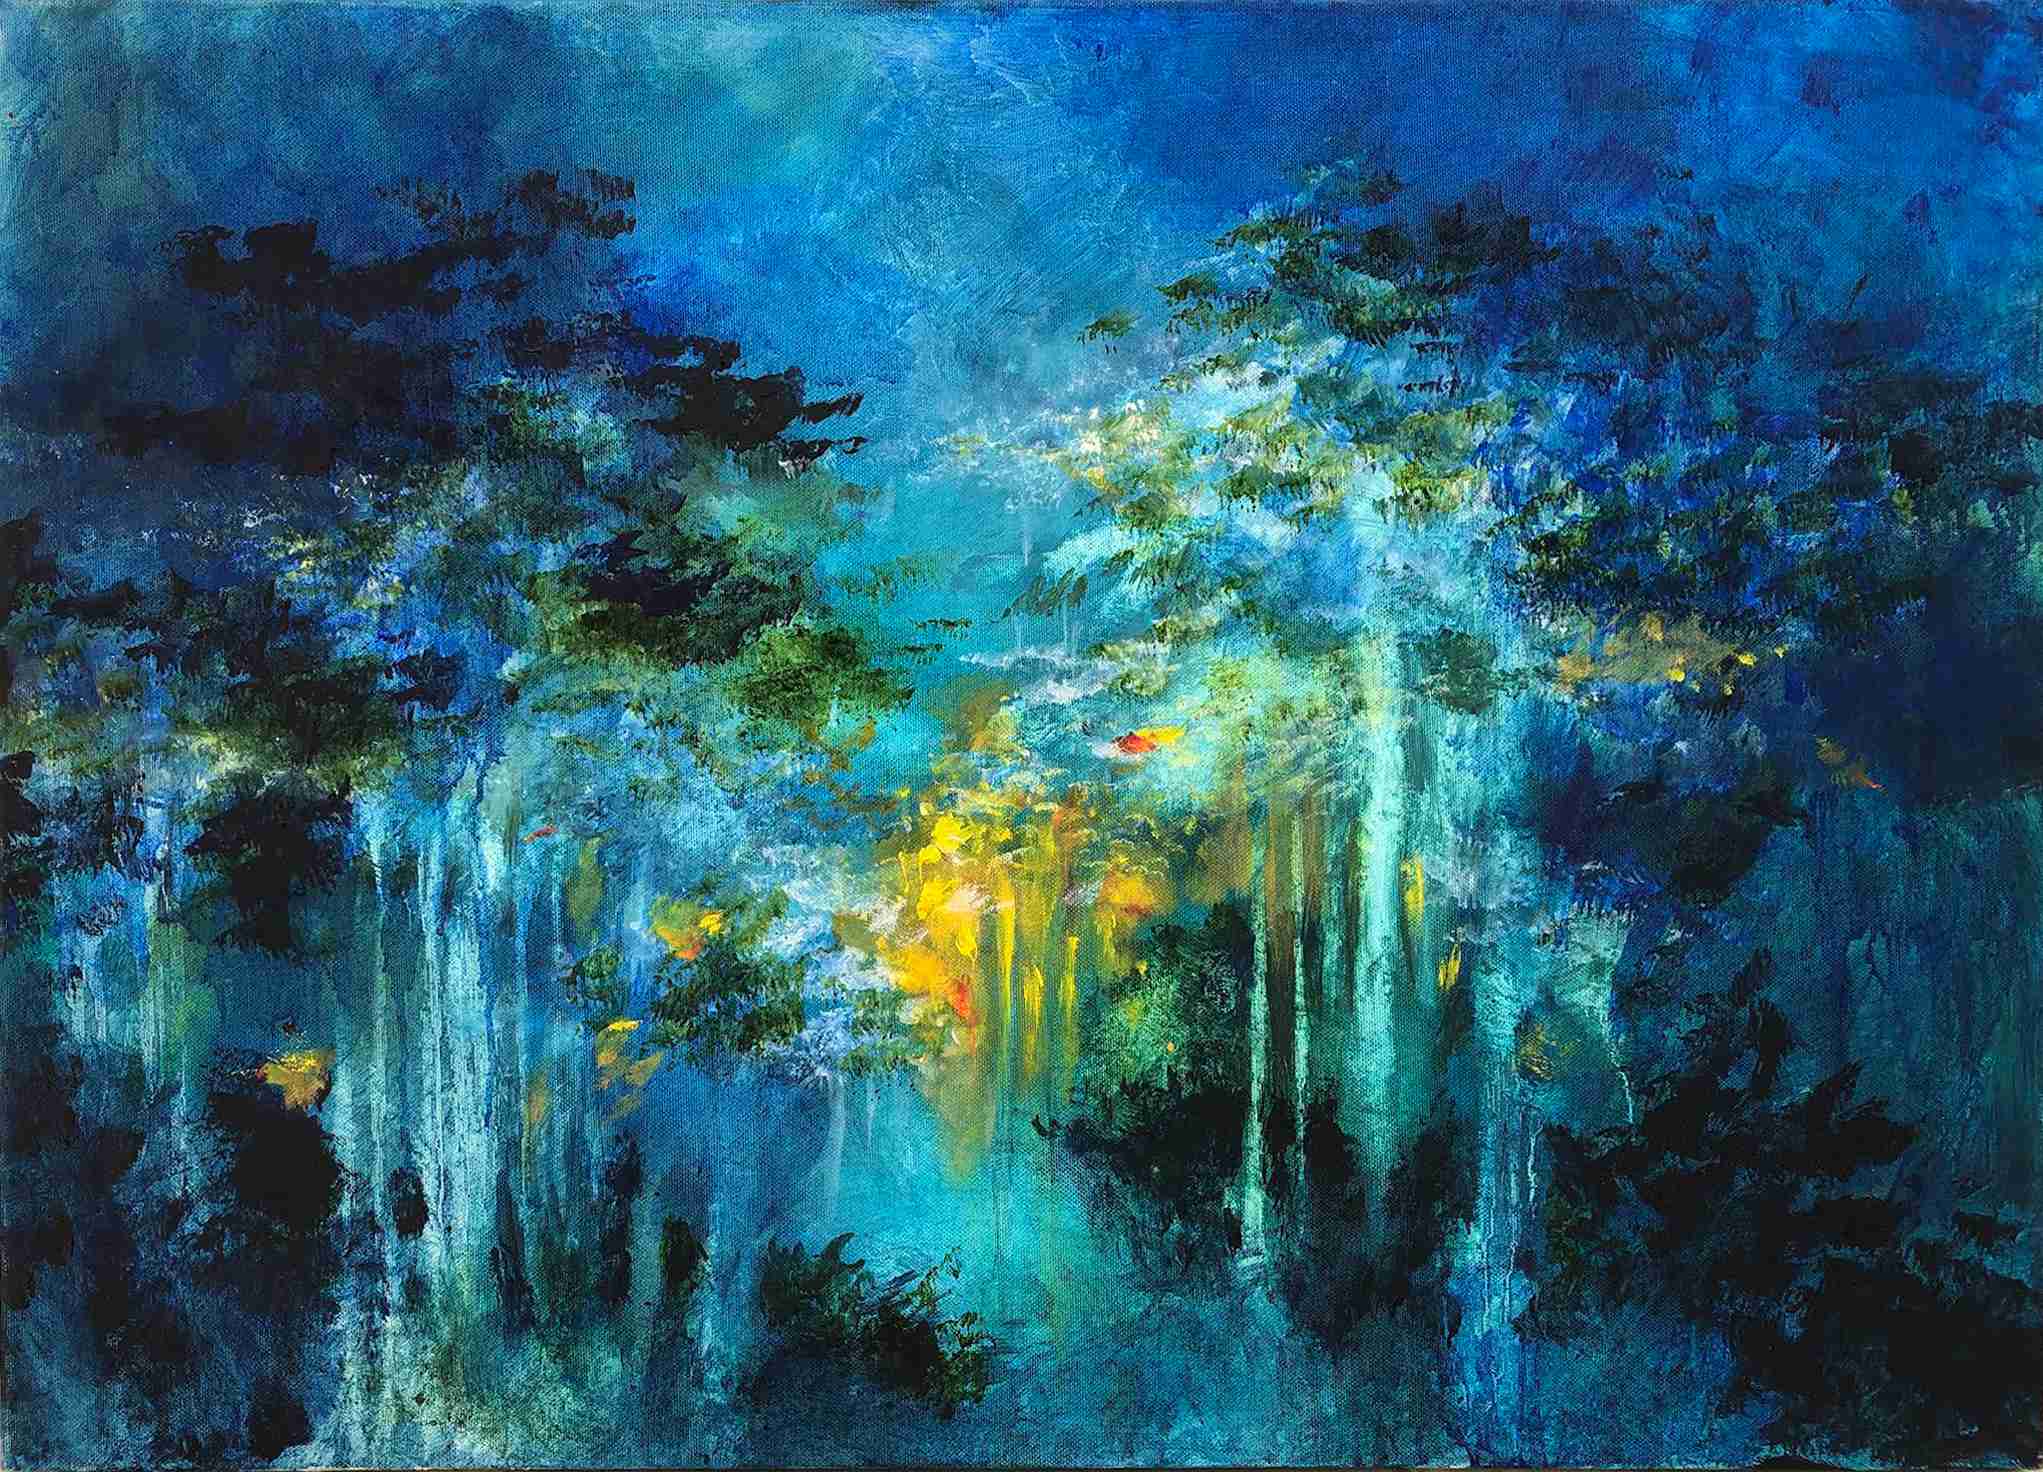 Distant light. Oil on canvas, Rivka Aderet Myers